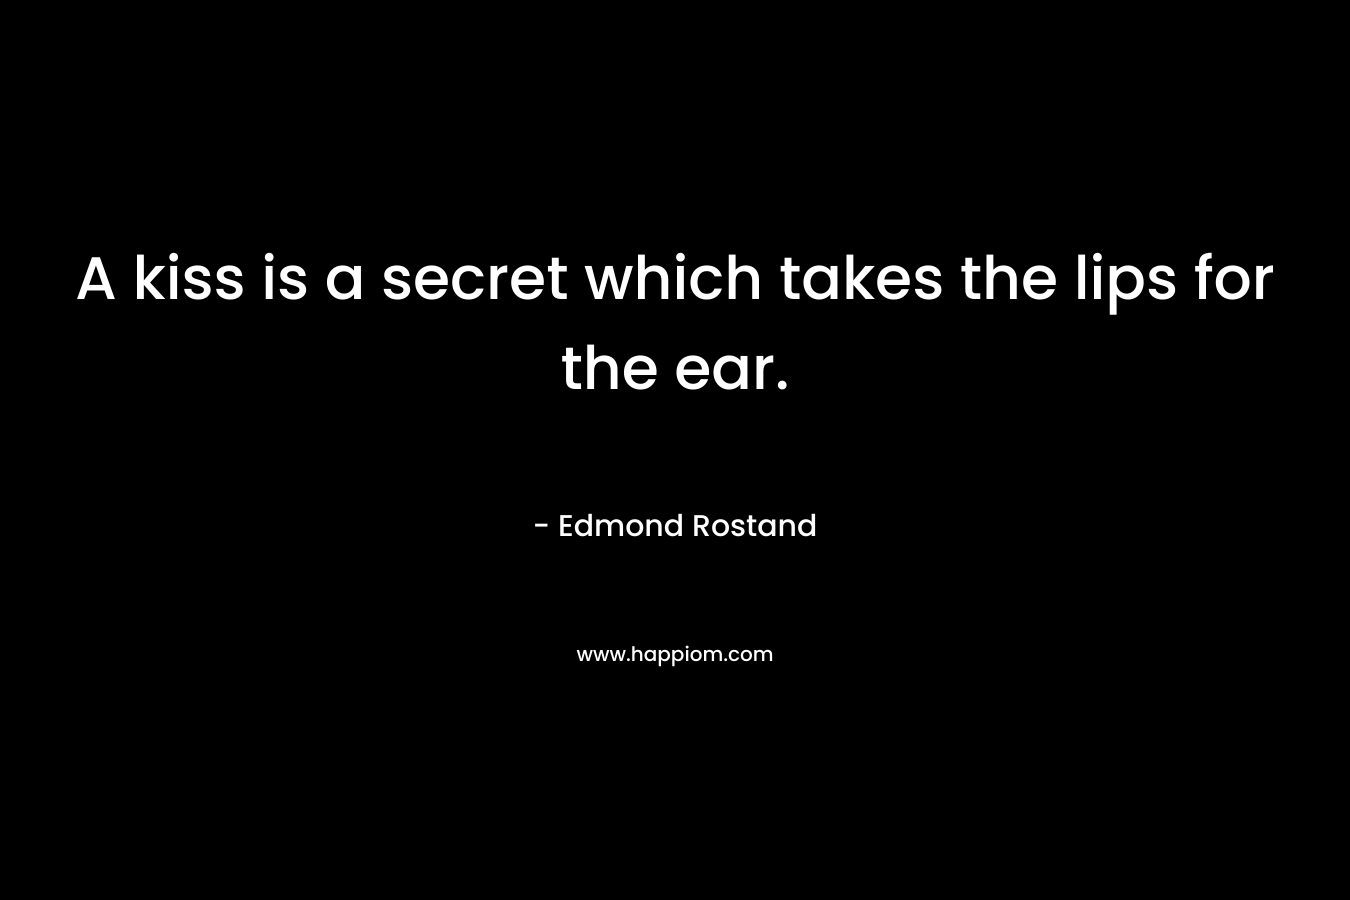 A kiss is a secret which takes the lips for the ear. – Edmond Rostand